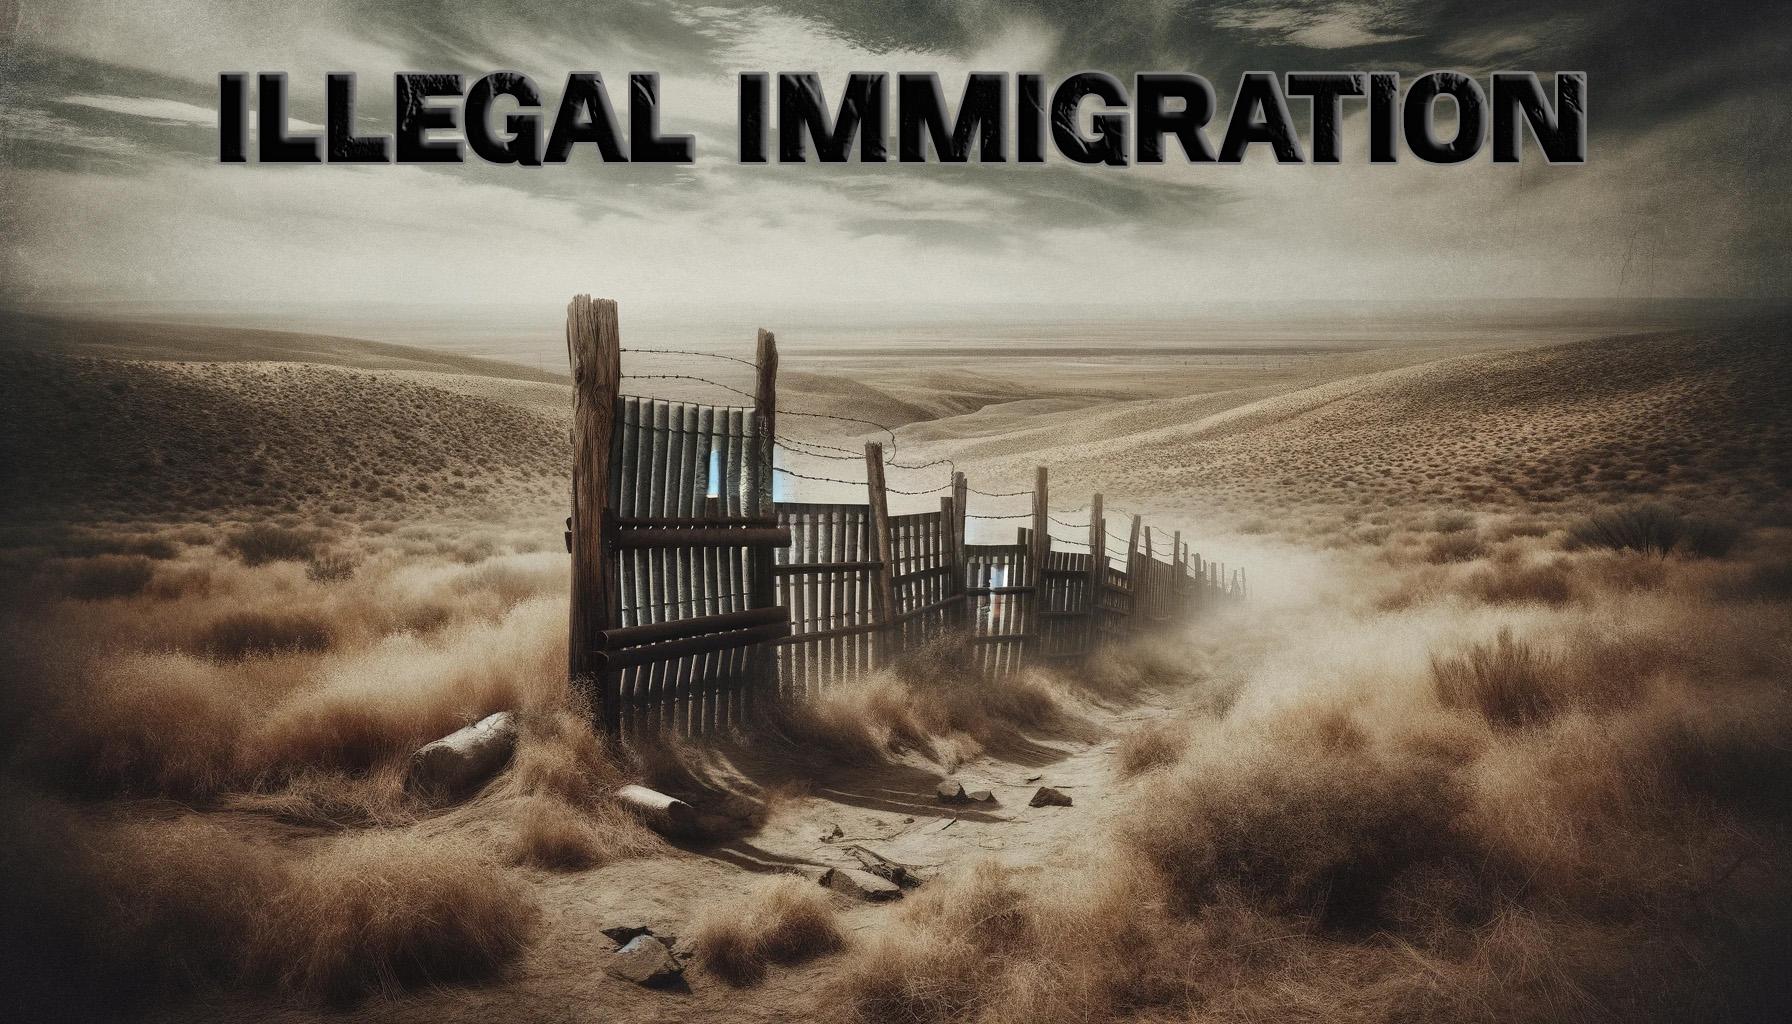 Illegal Immigration News Graphic